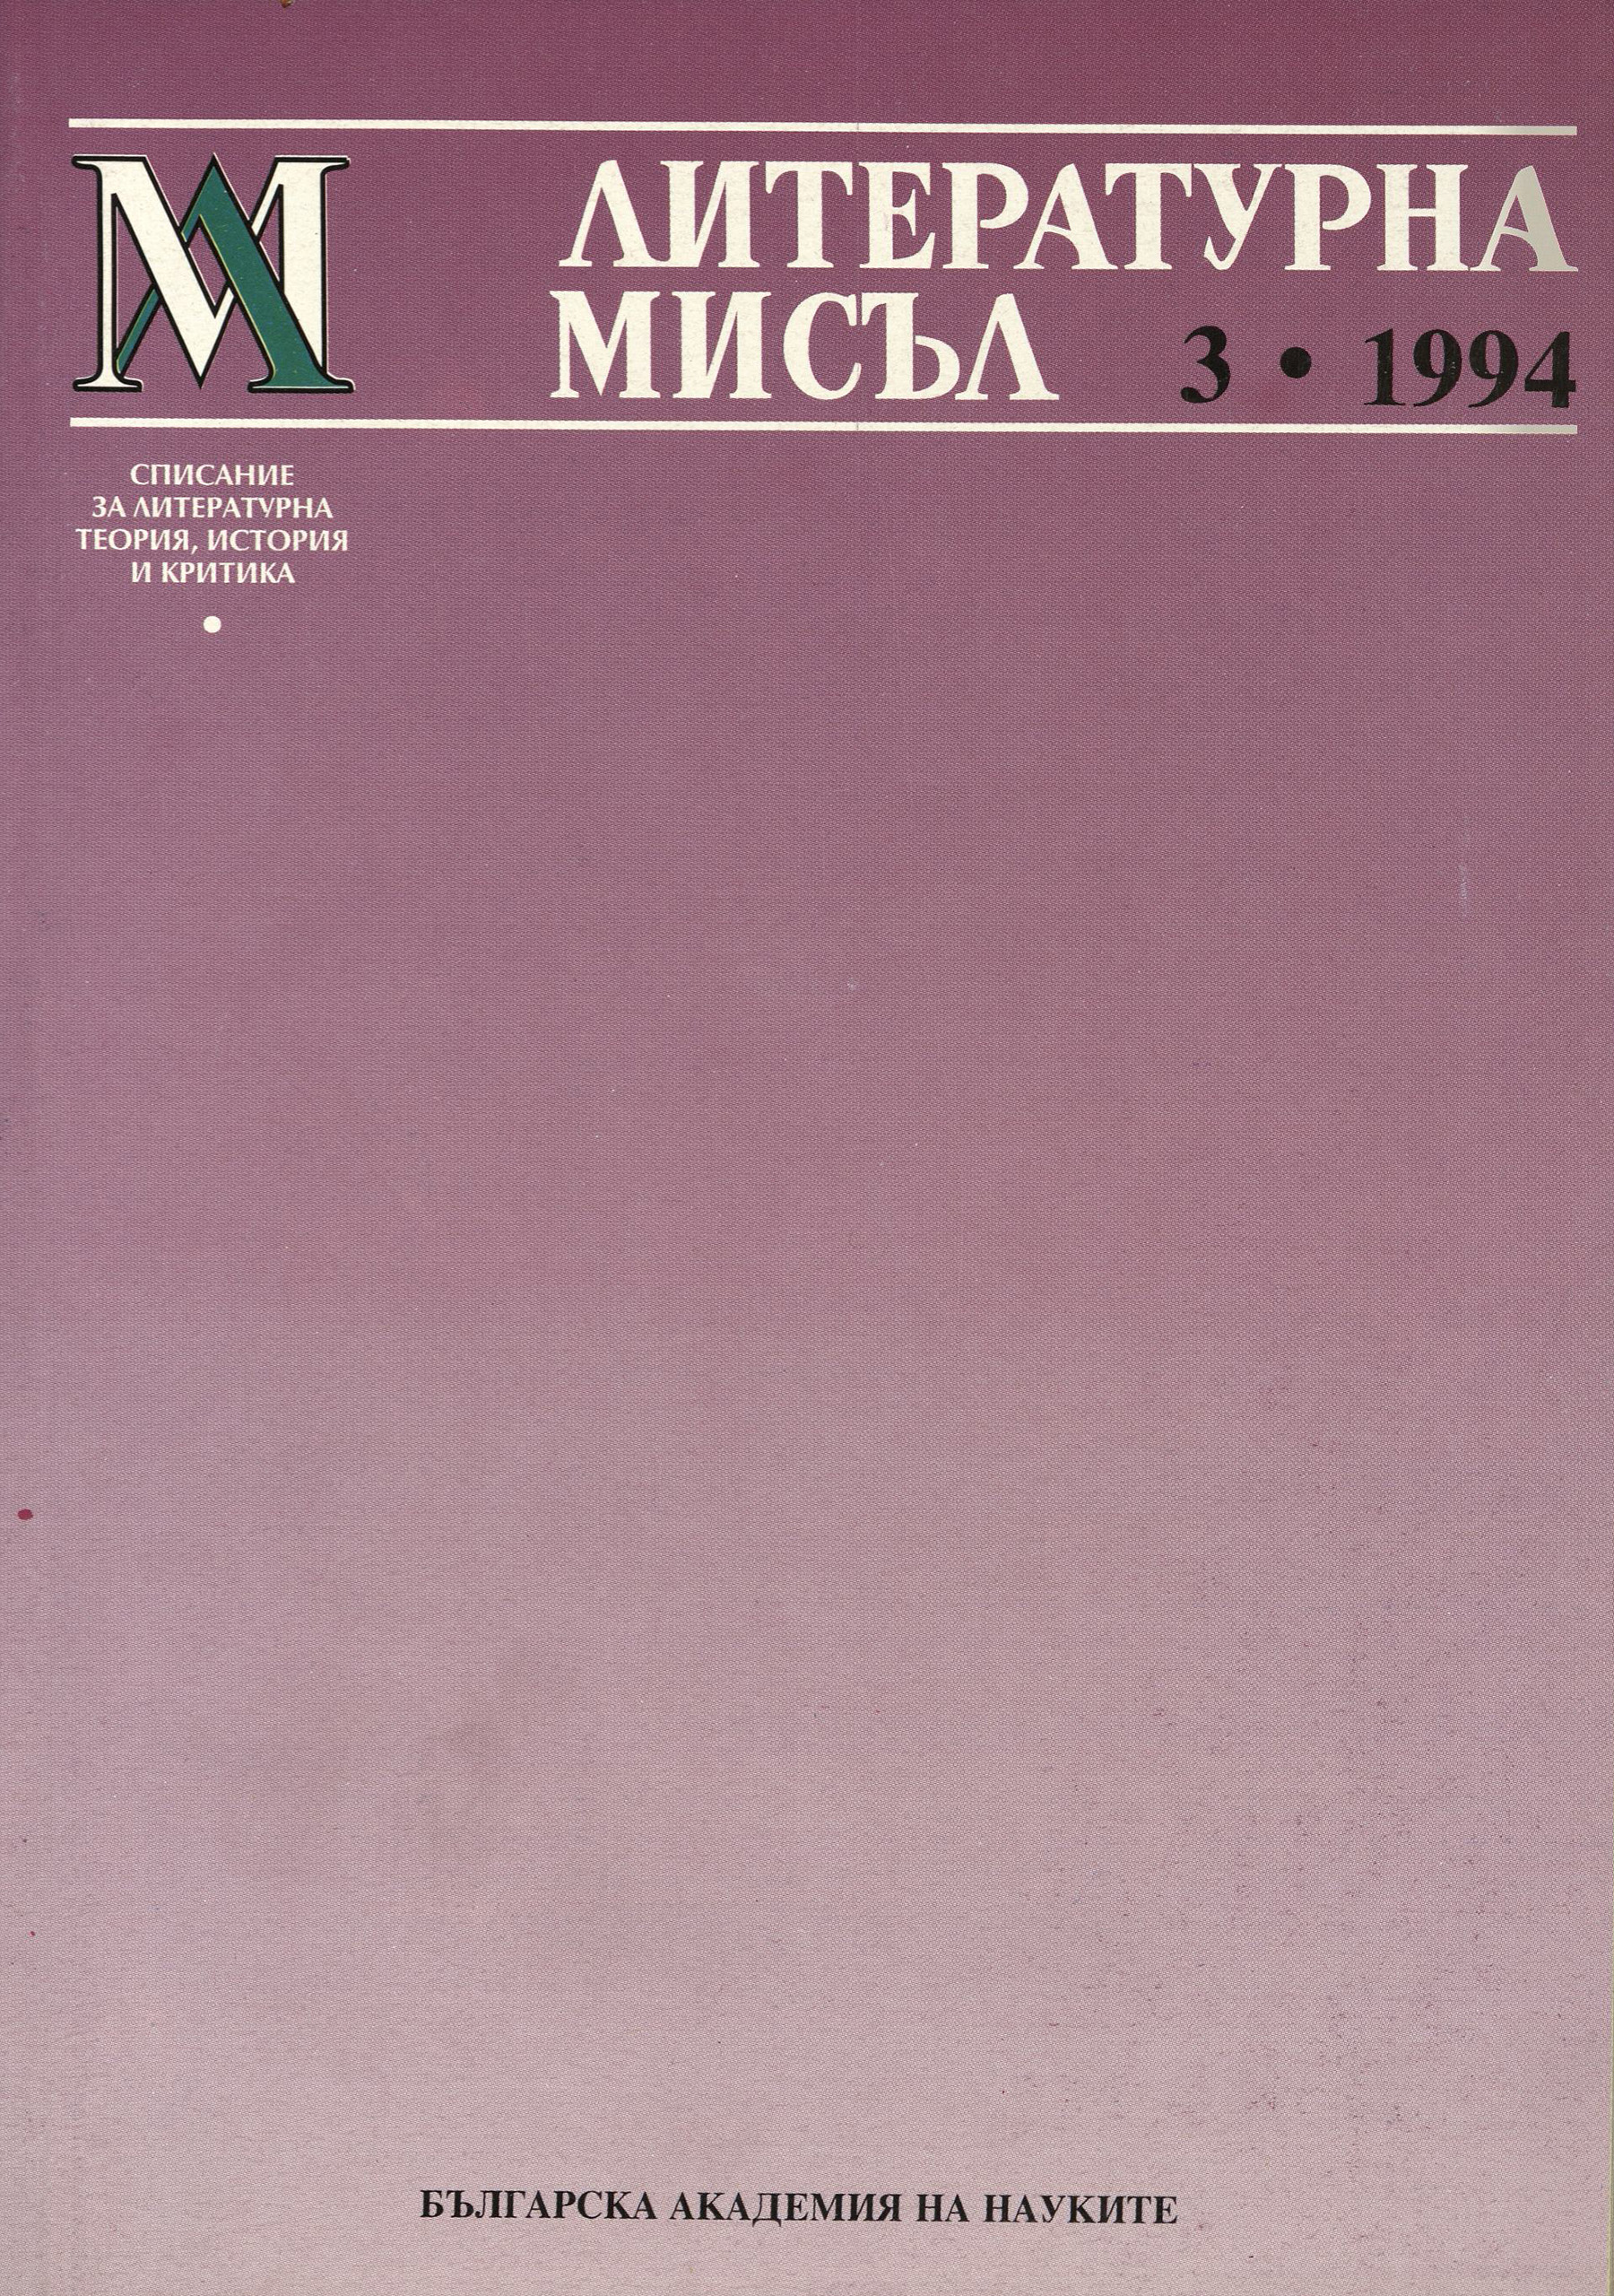 Issue 3, 1994